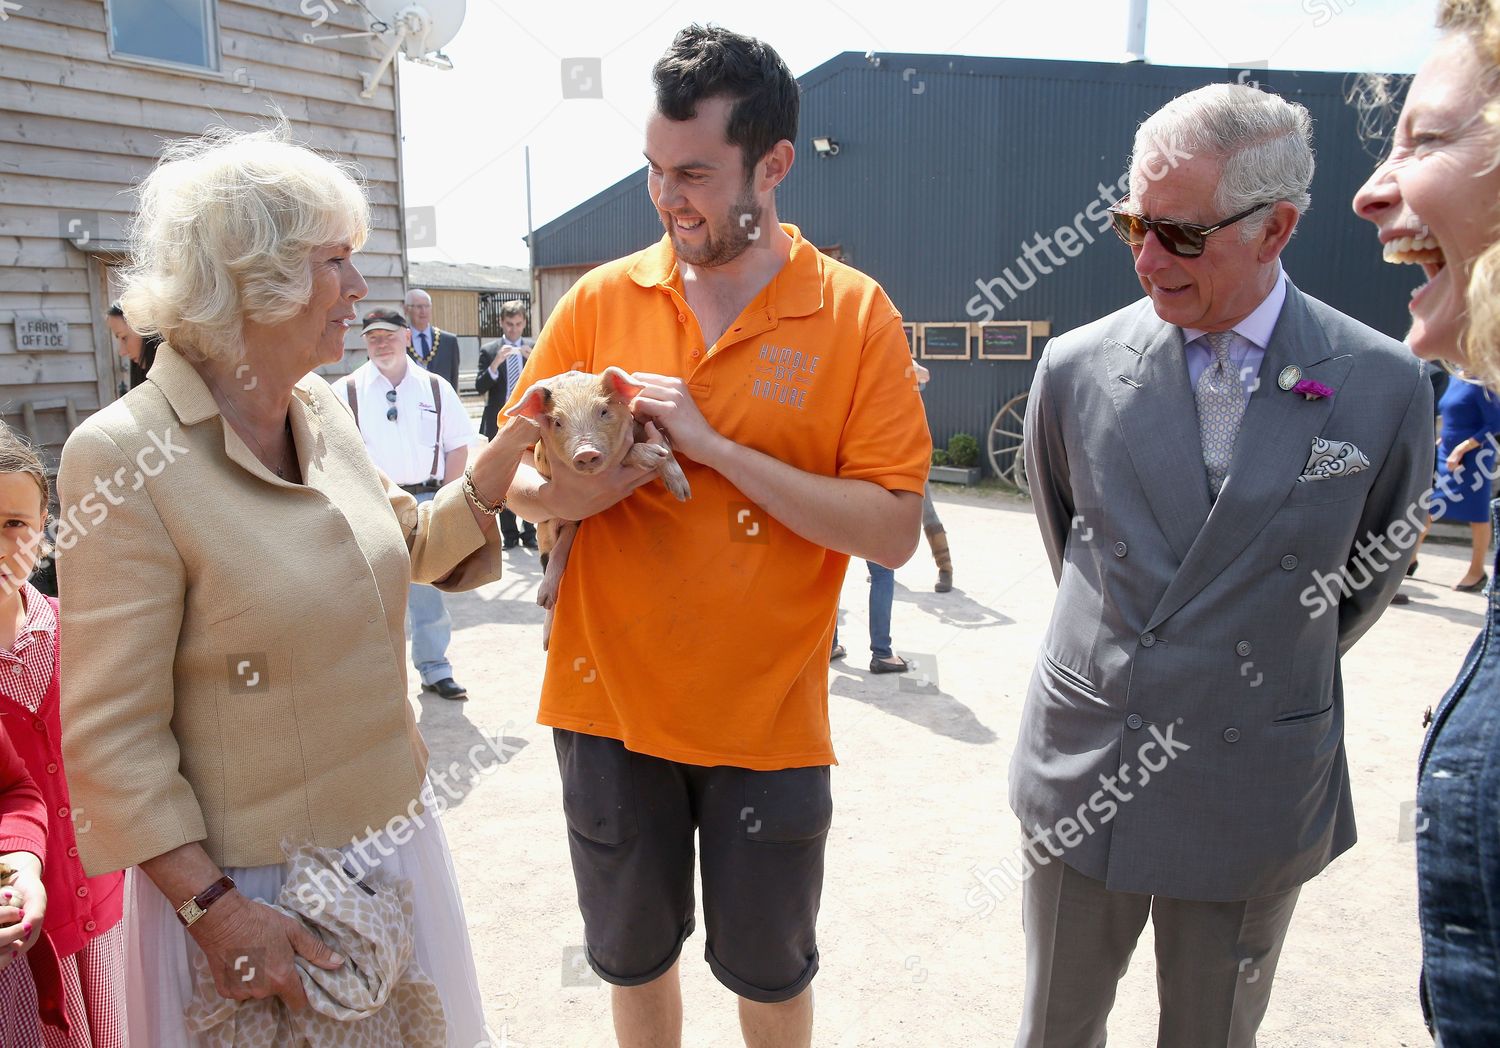 prince-charles-and-camilla-duchess-of-cornwall-annual-summer-visit-to-wales-britain-shutterstock-editorial-4899926b.jpg